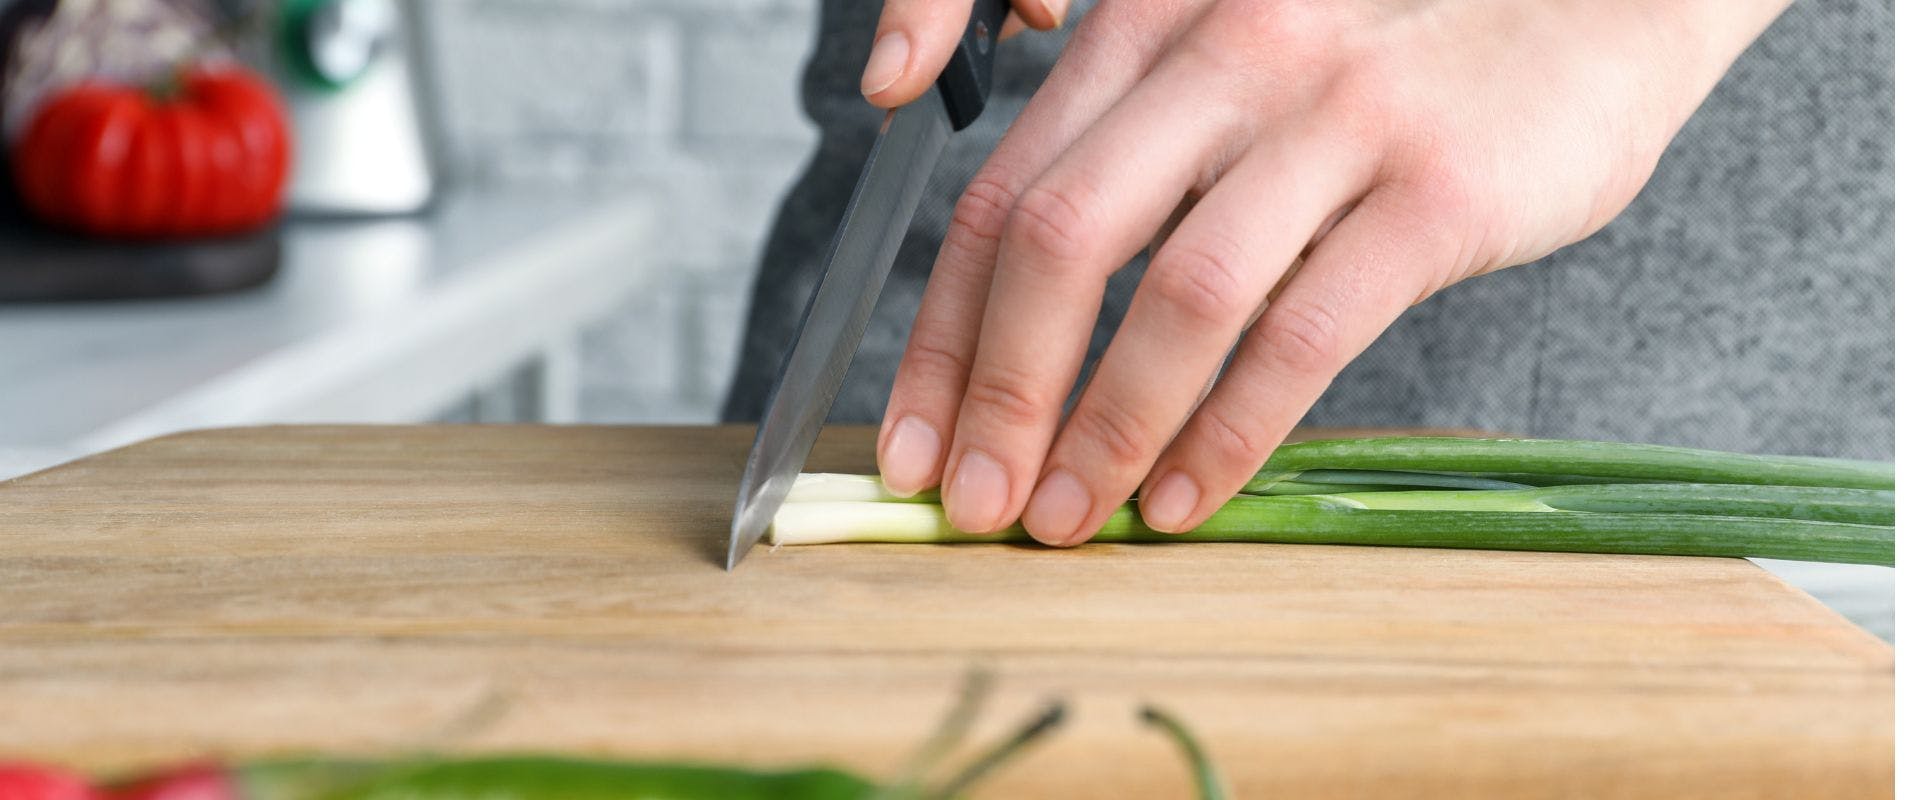 Green onions being chopped on wooden chopping board